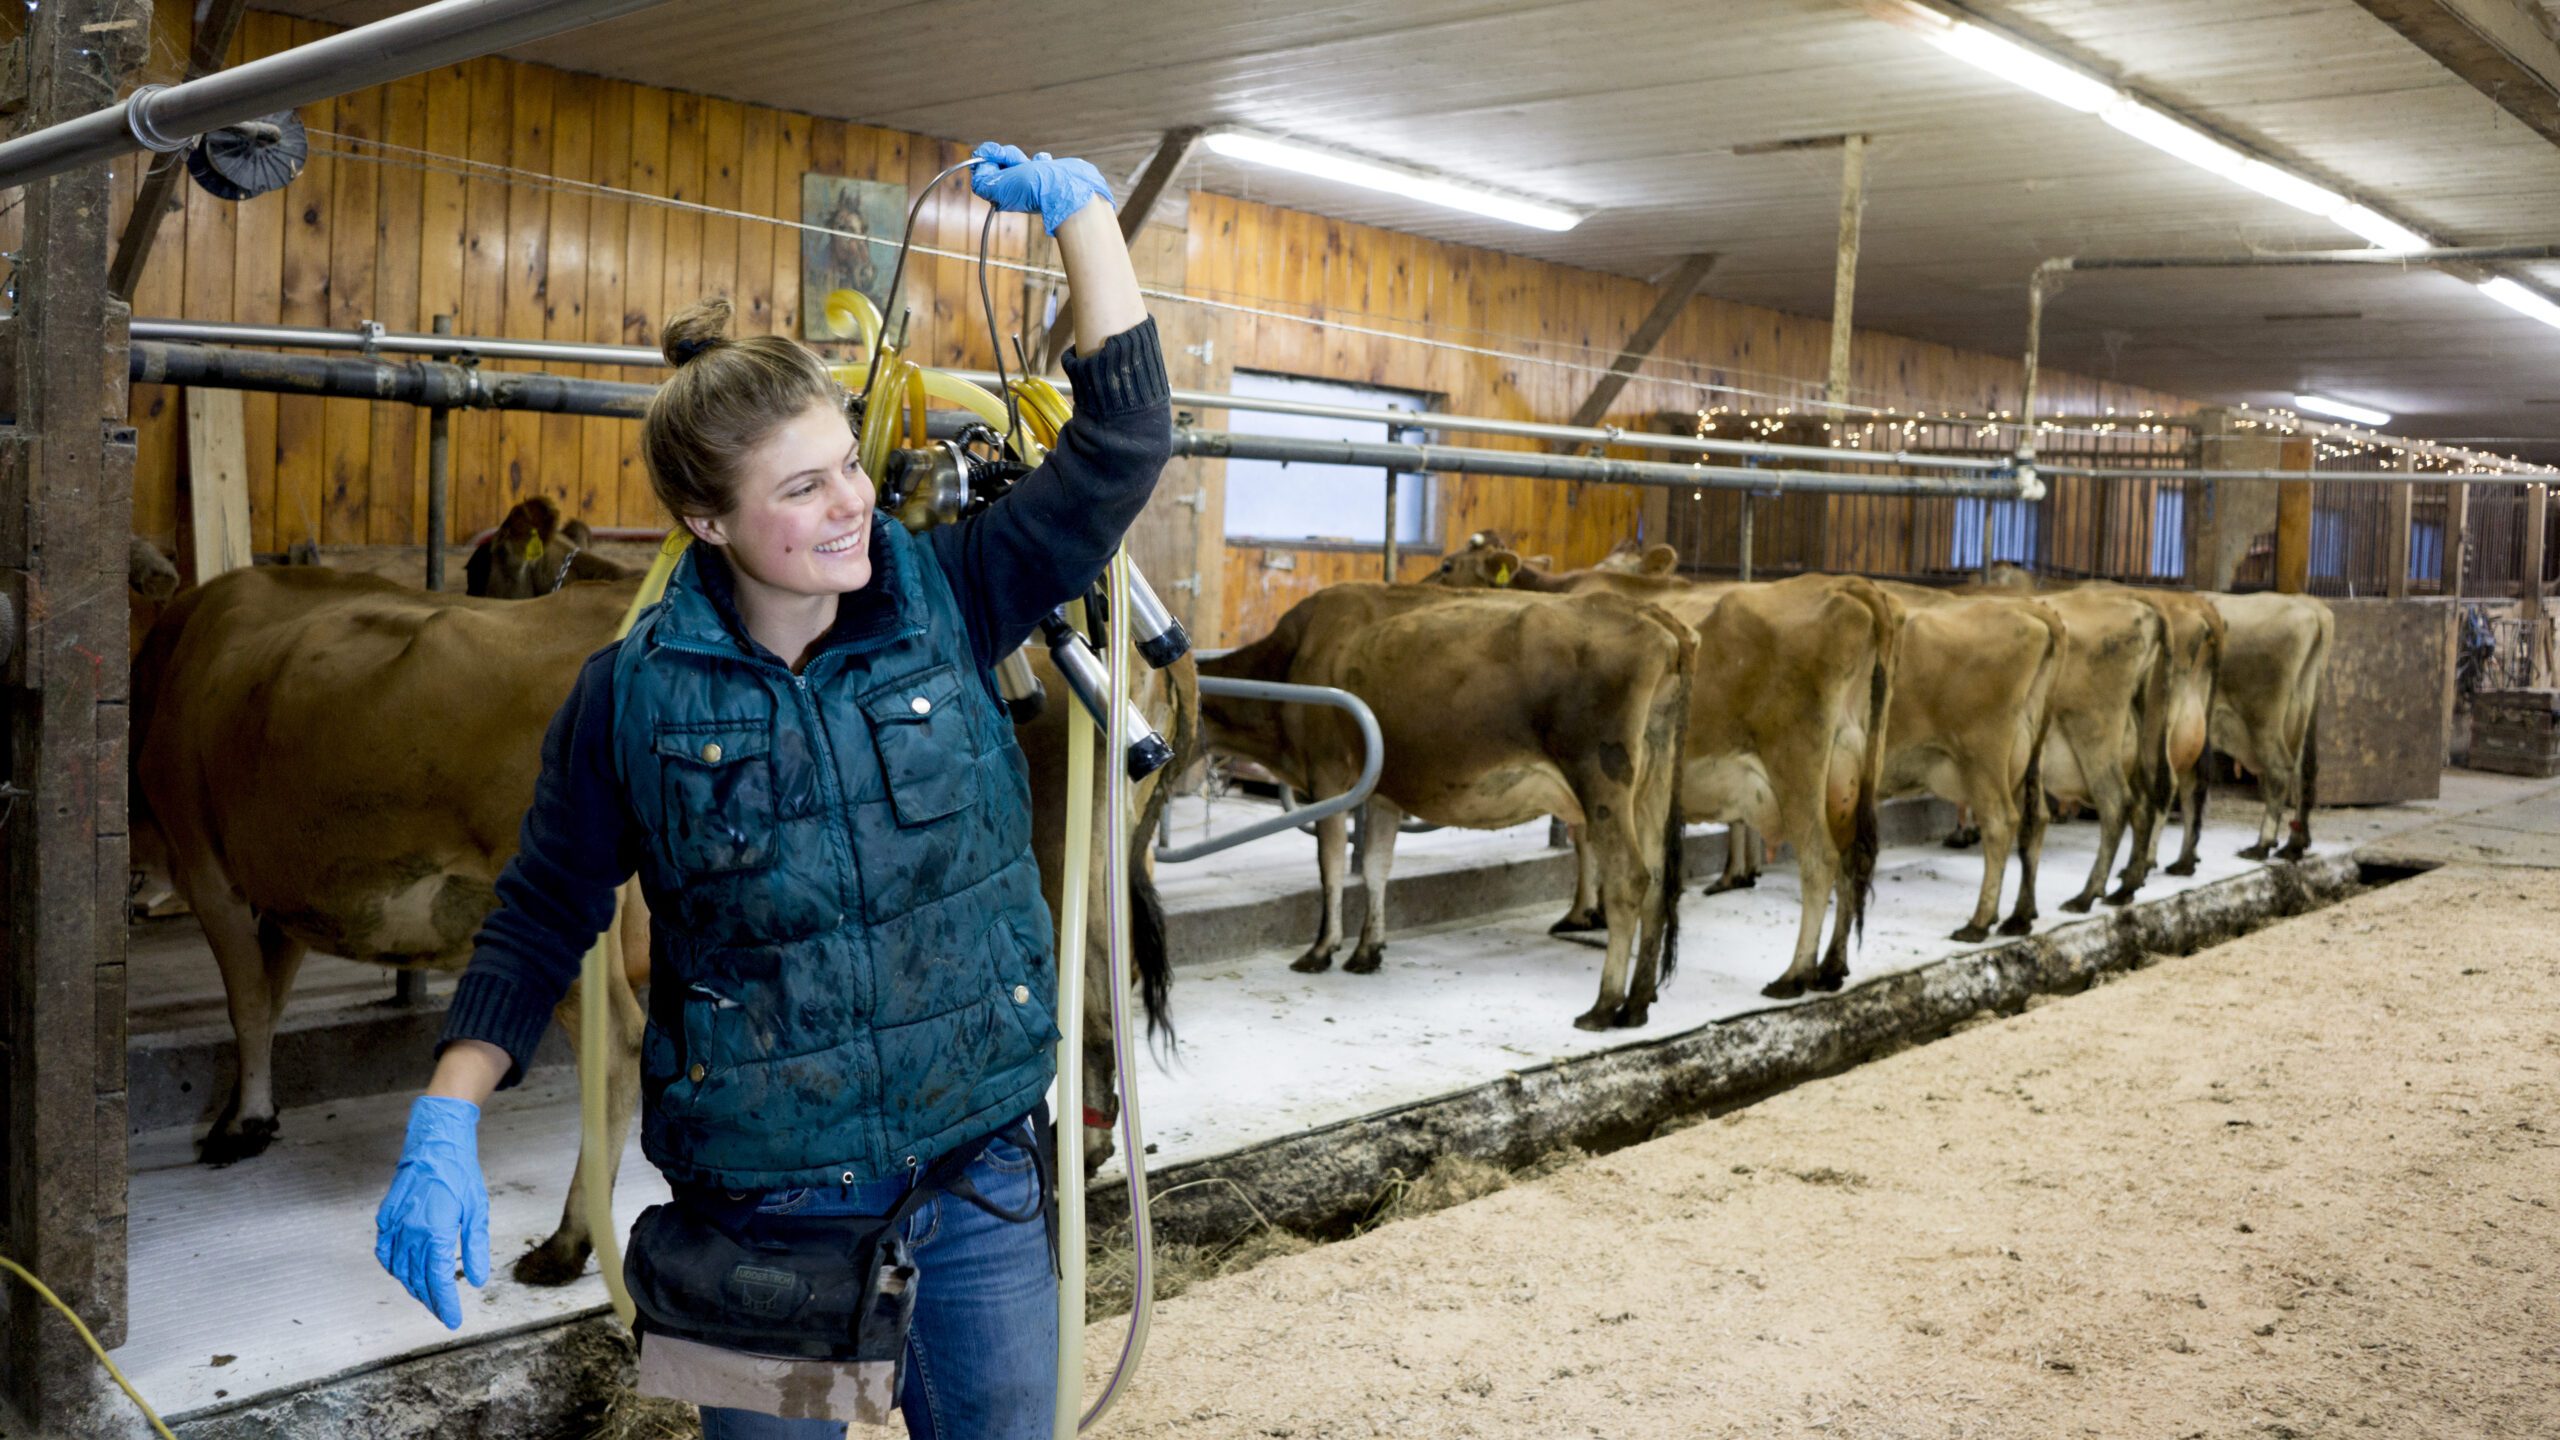 Woman holds milking apparatus with cows in background